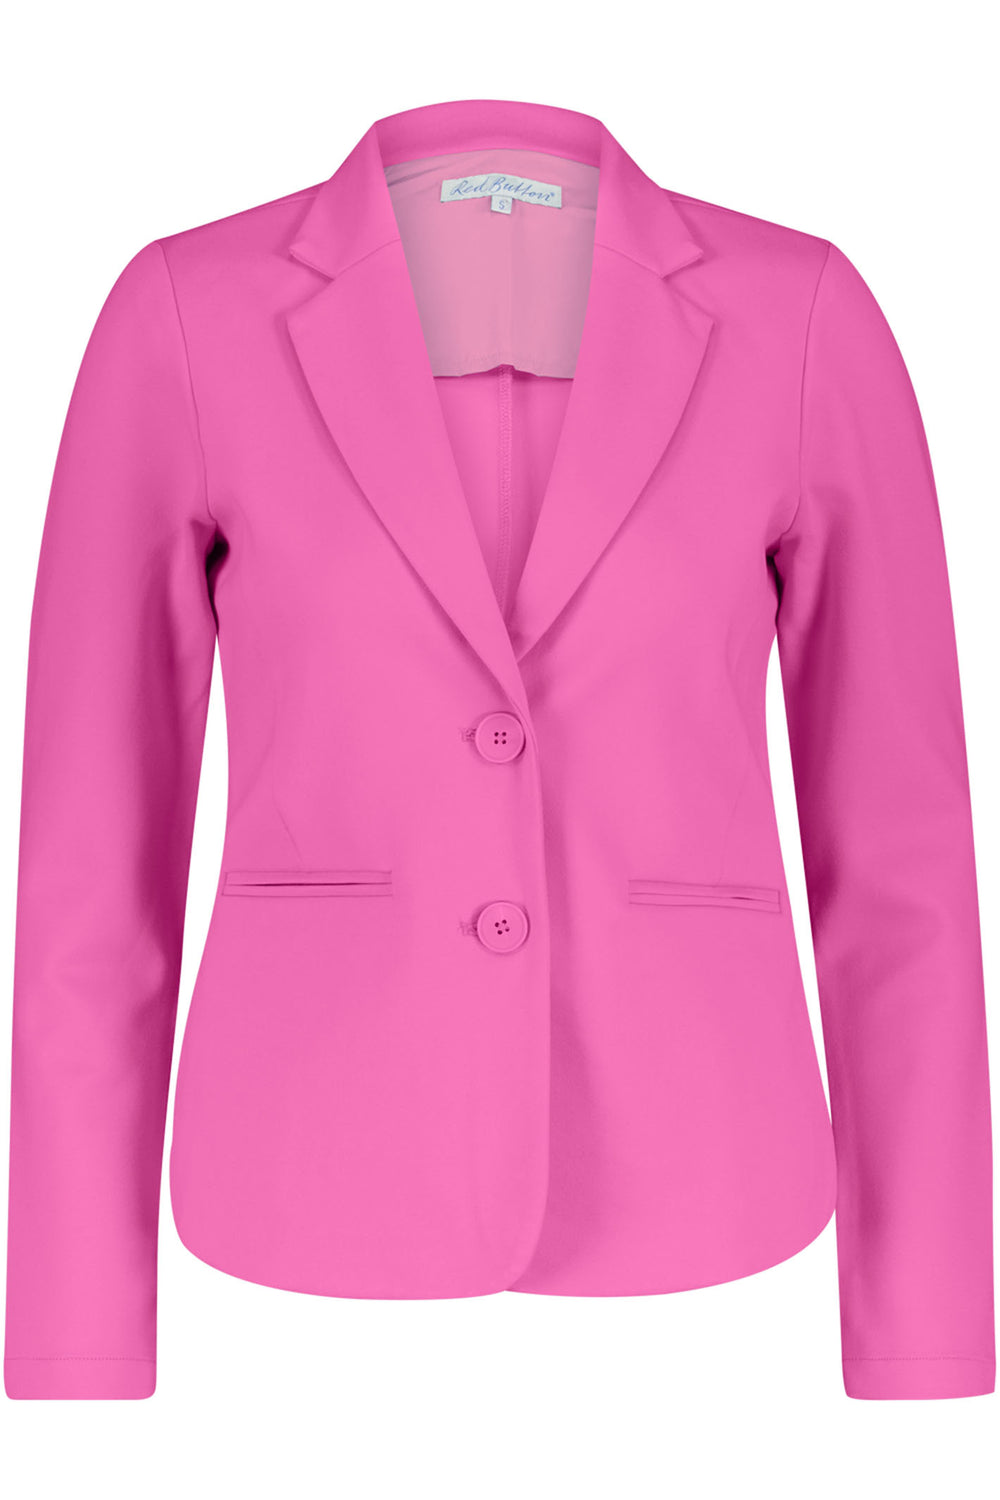 Red Button SRB4213 Cyclaam Pink Two Button Blazer Jacket - Olivia Grace Fashion